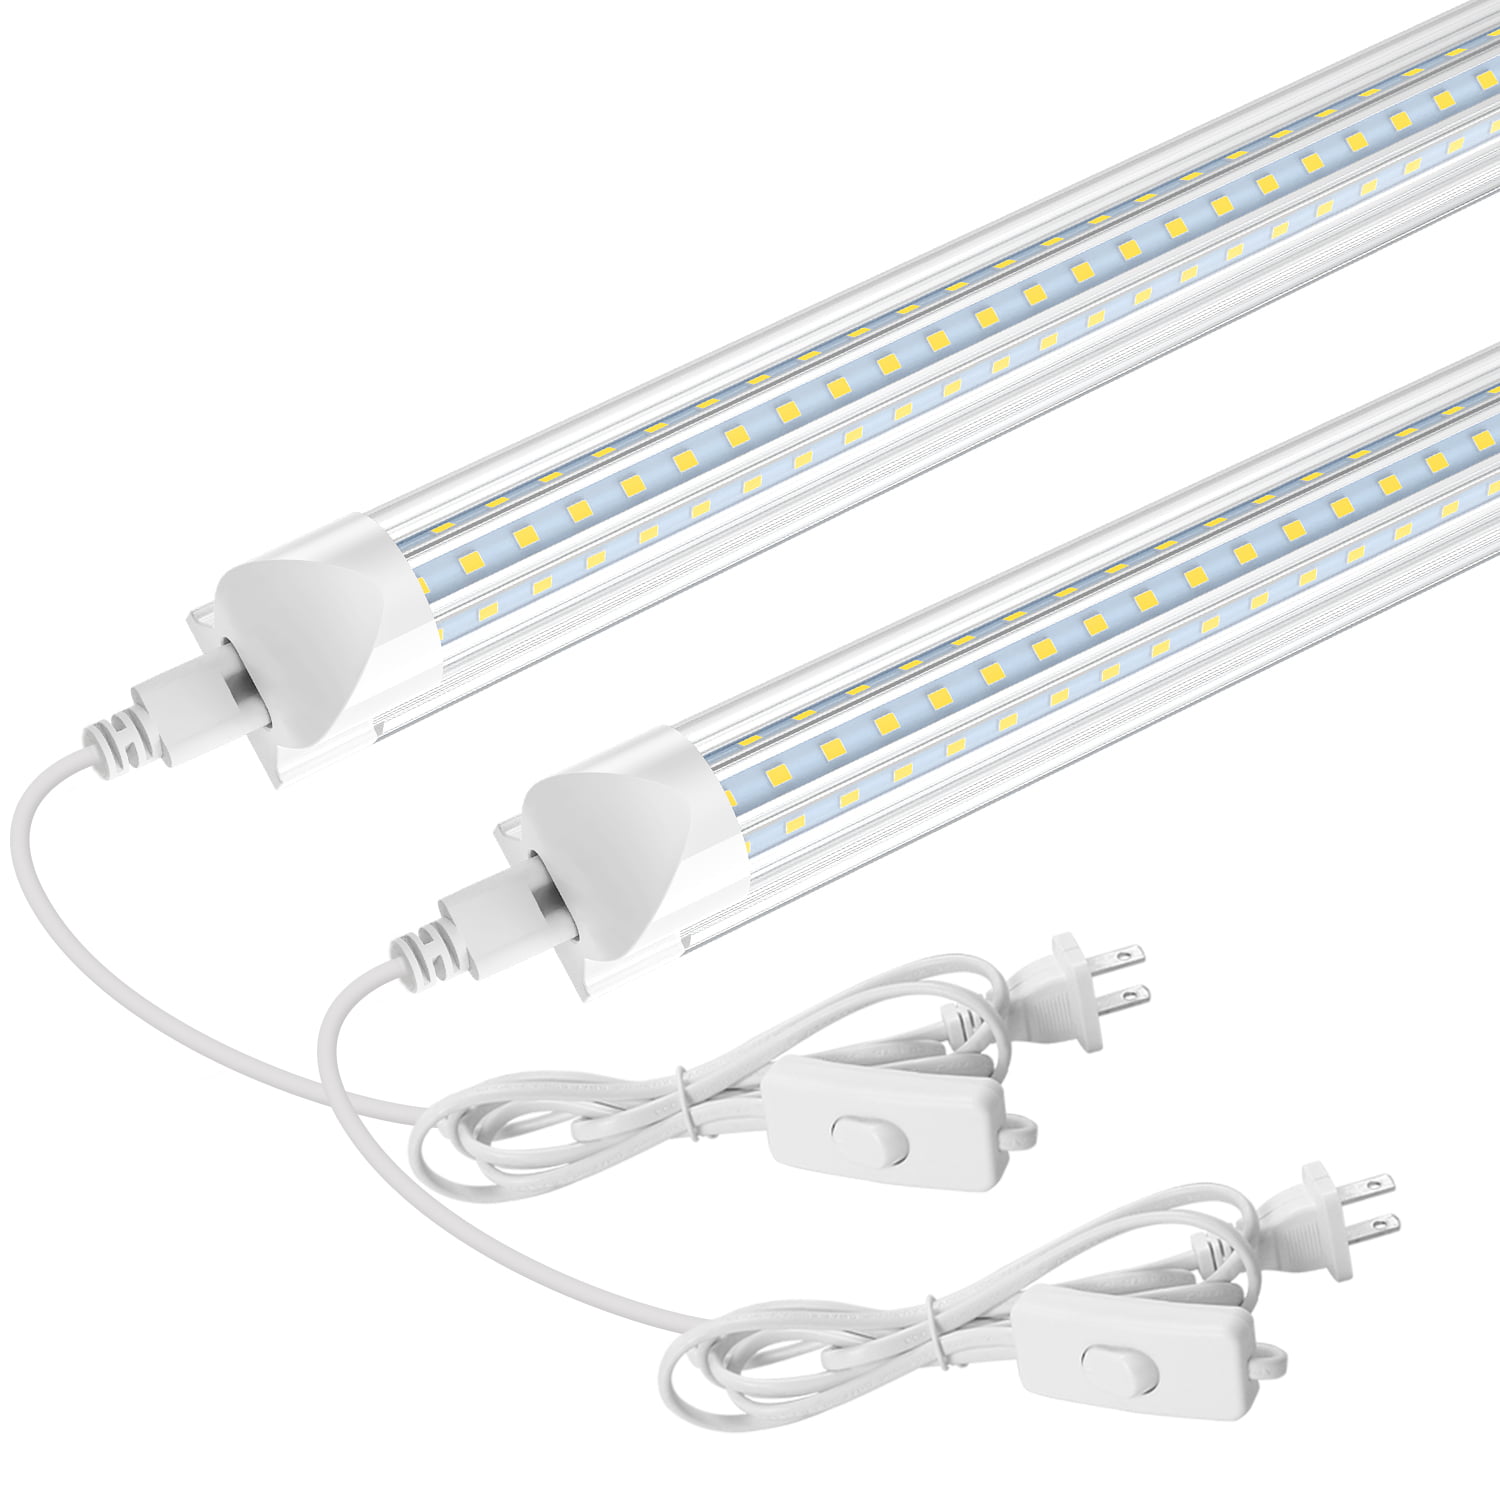 24" Task Light Lab Fluorescent Light Metal Assembly w/ Switch and 8' Power Cord 